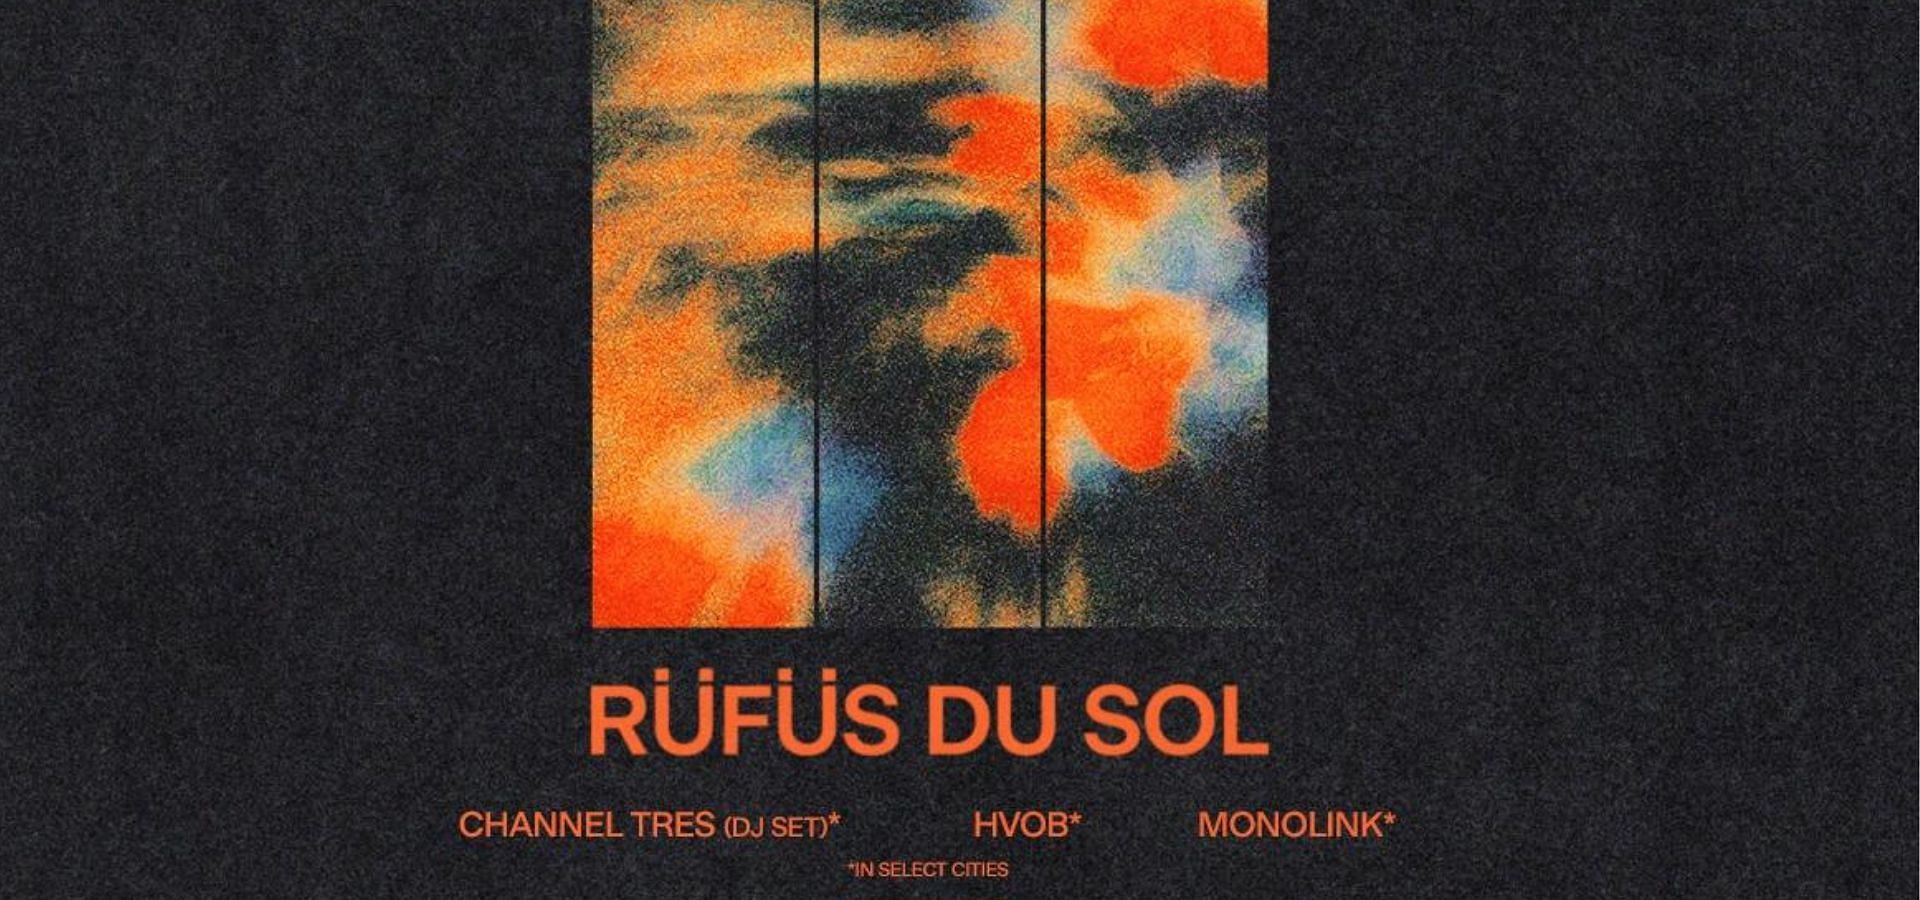 Rufus Du Sol Tour Tickets, where to buy, dates, venues, and more